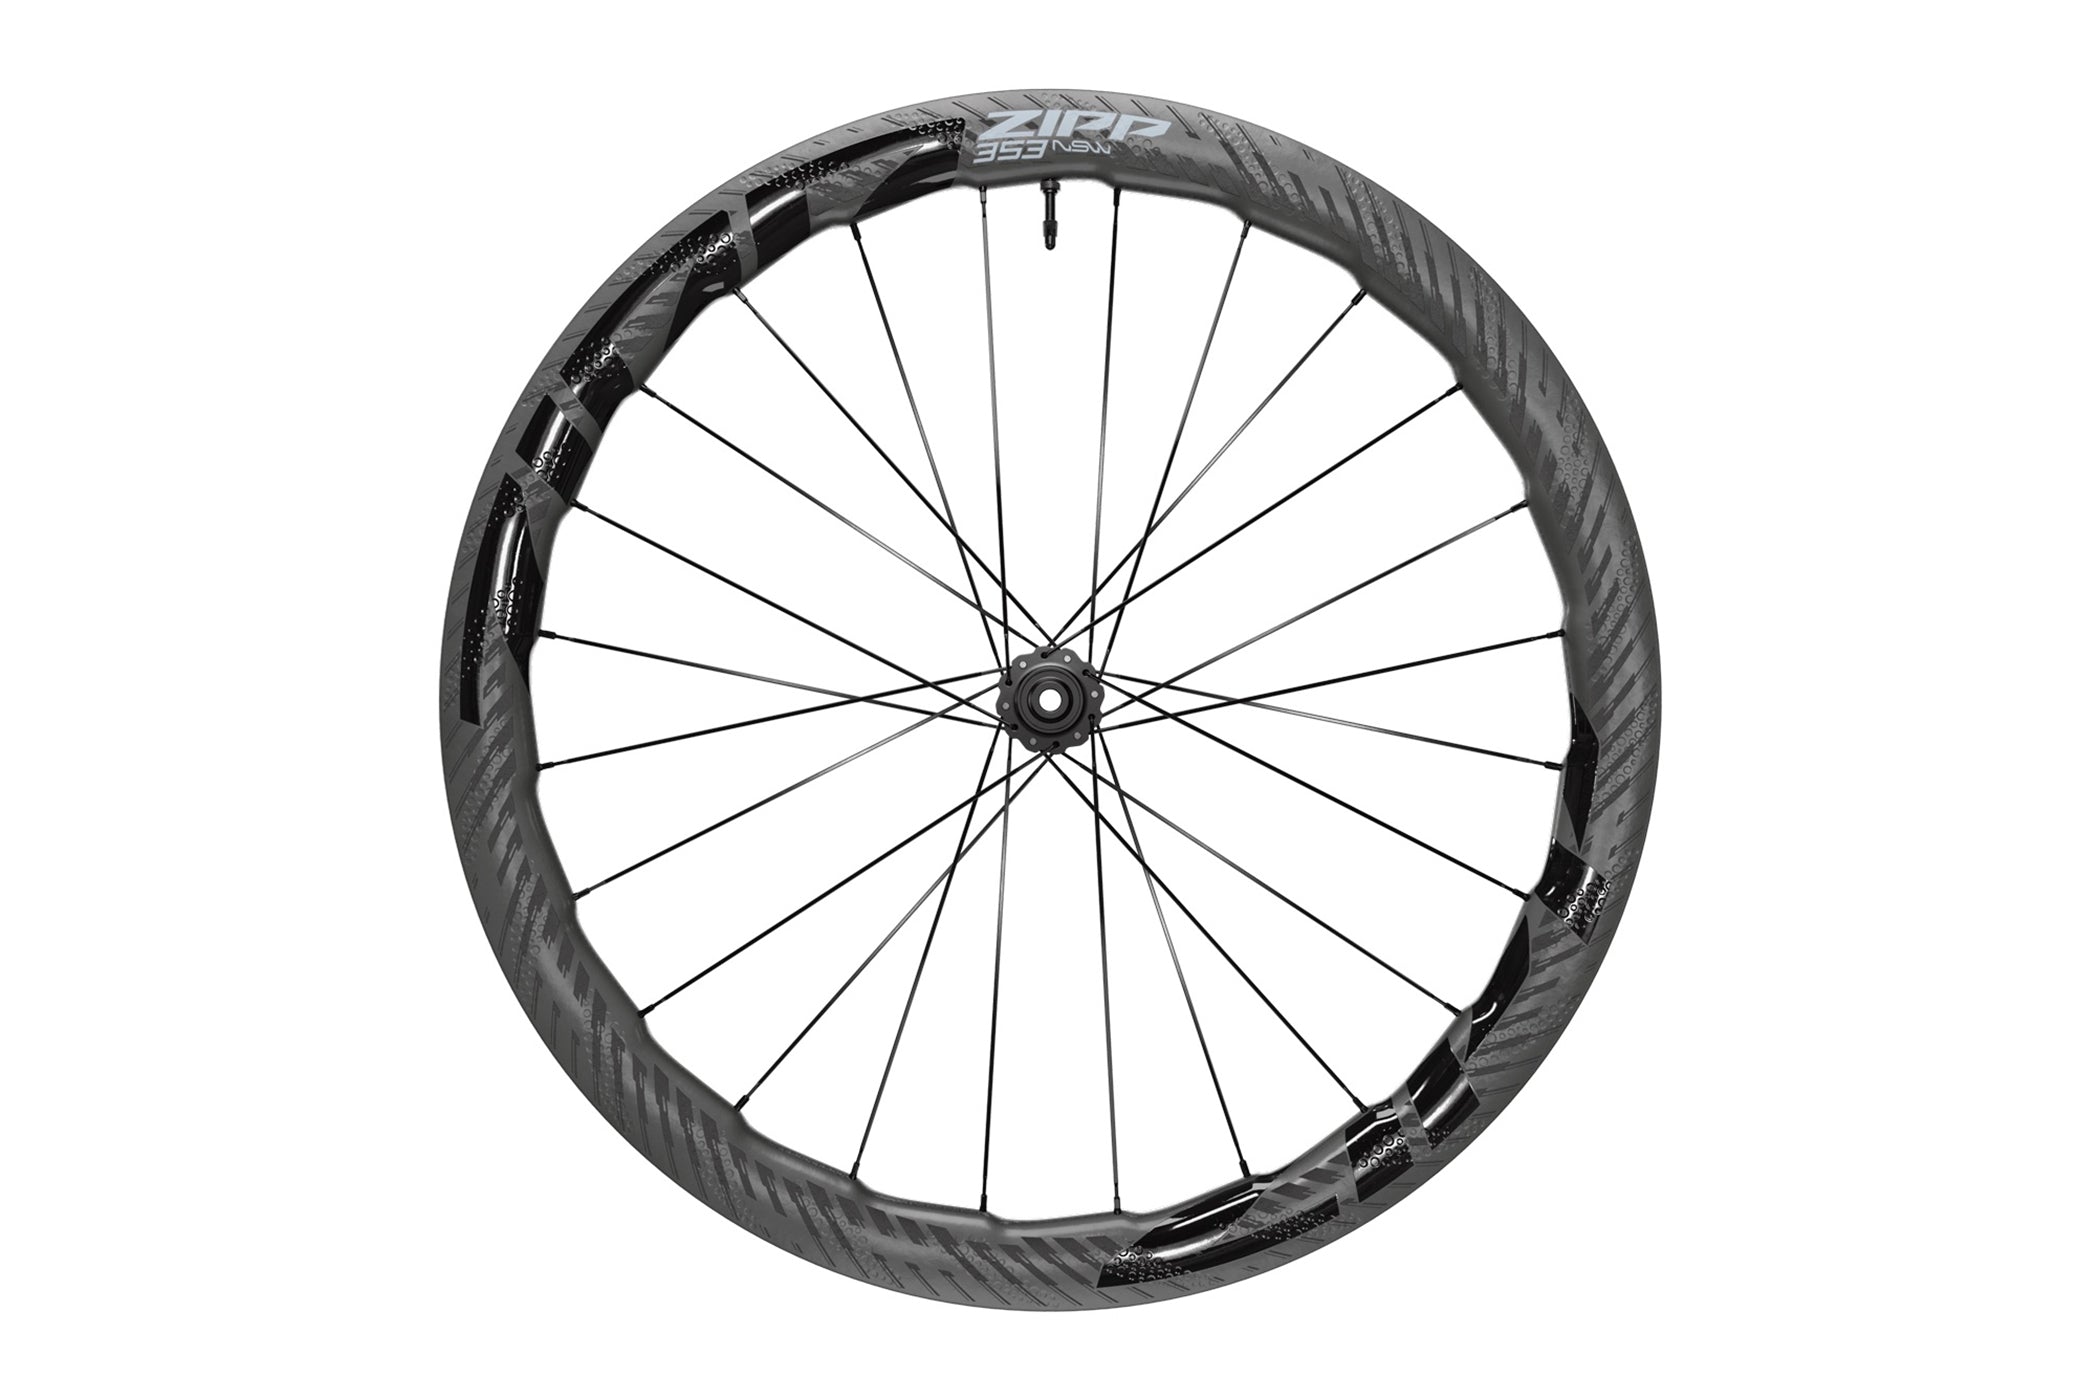 Zipp 303 Wheels For Sale | New & Used 303s, 353, Firecrest | The 